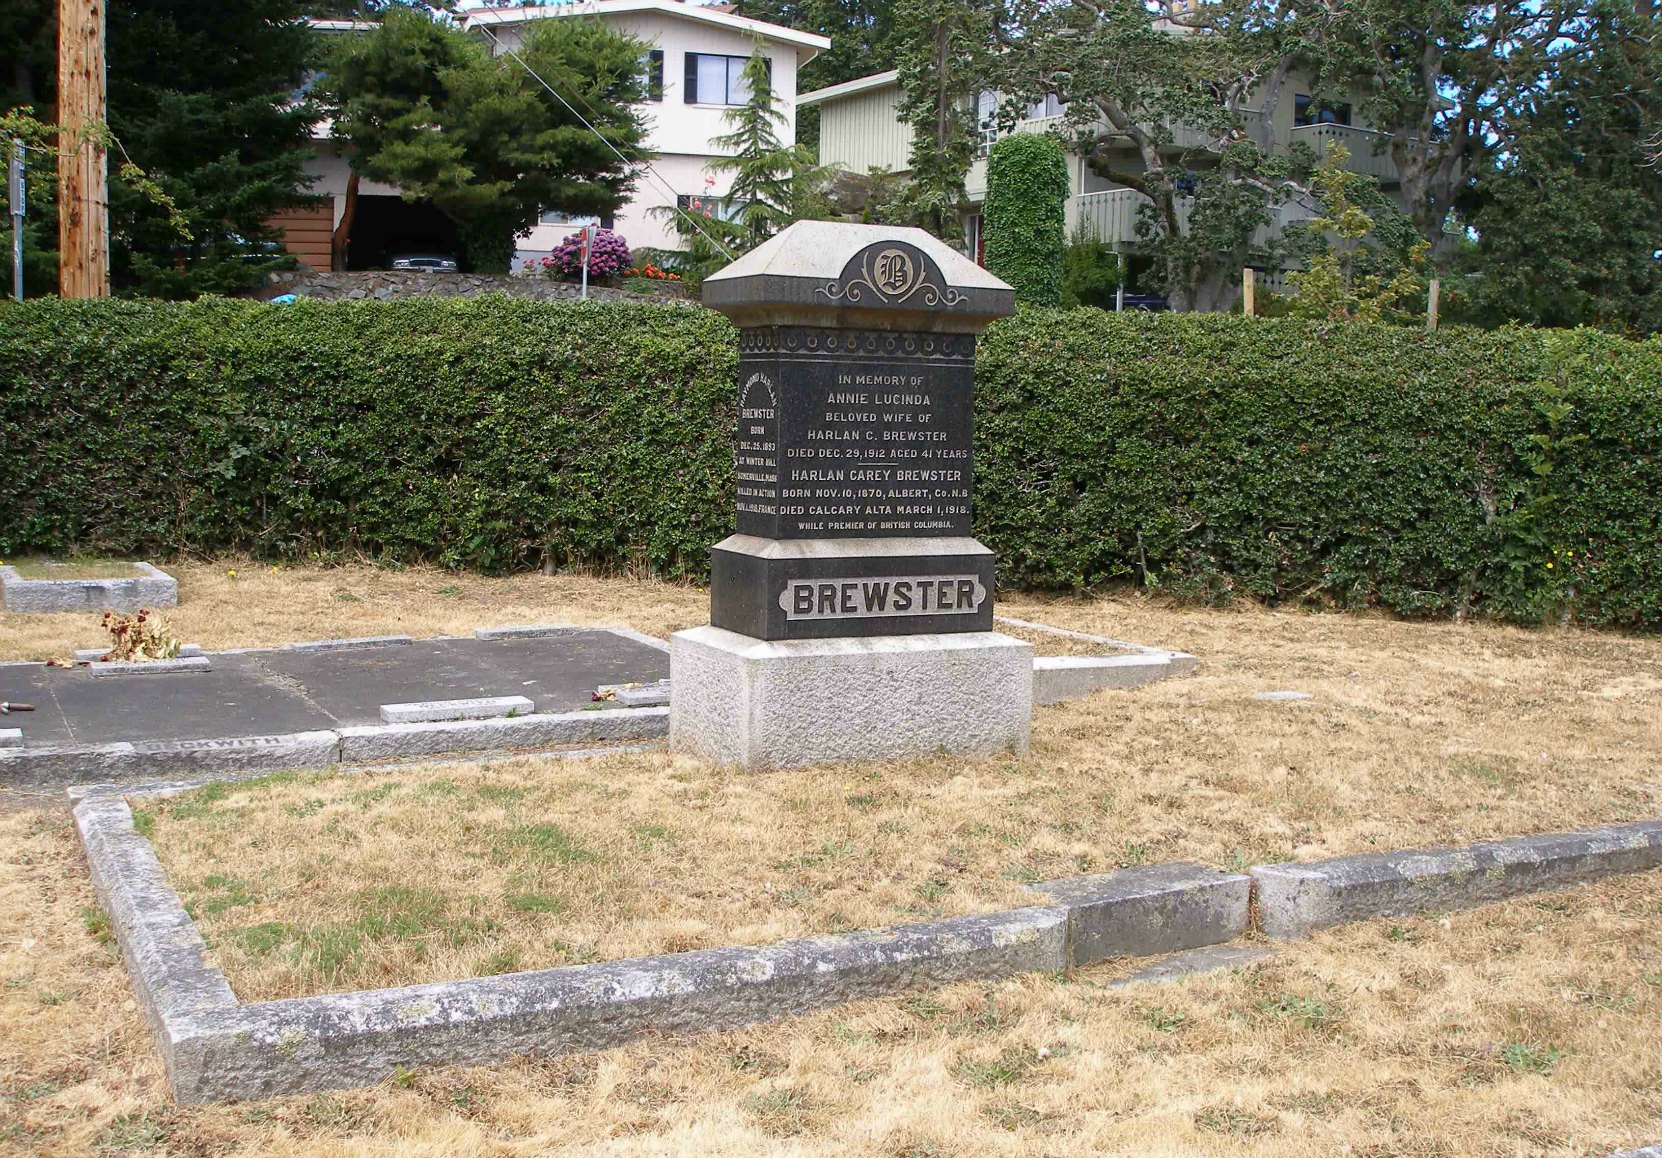 Harlan Carey Brewster family burial plot, Ross Bay Cemetery, Victoria, B.C. (photo by Temple Lodge No. 33 Historian)